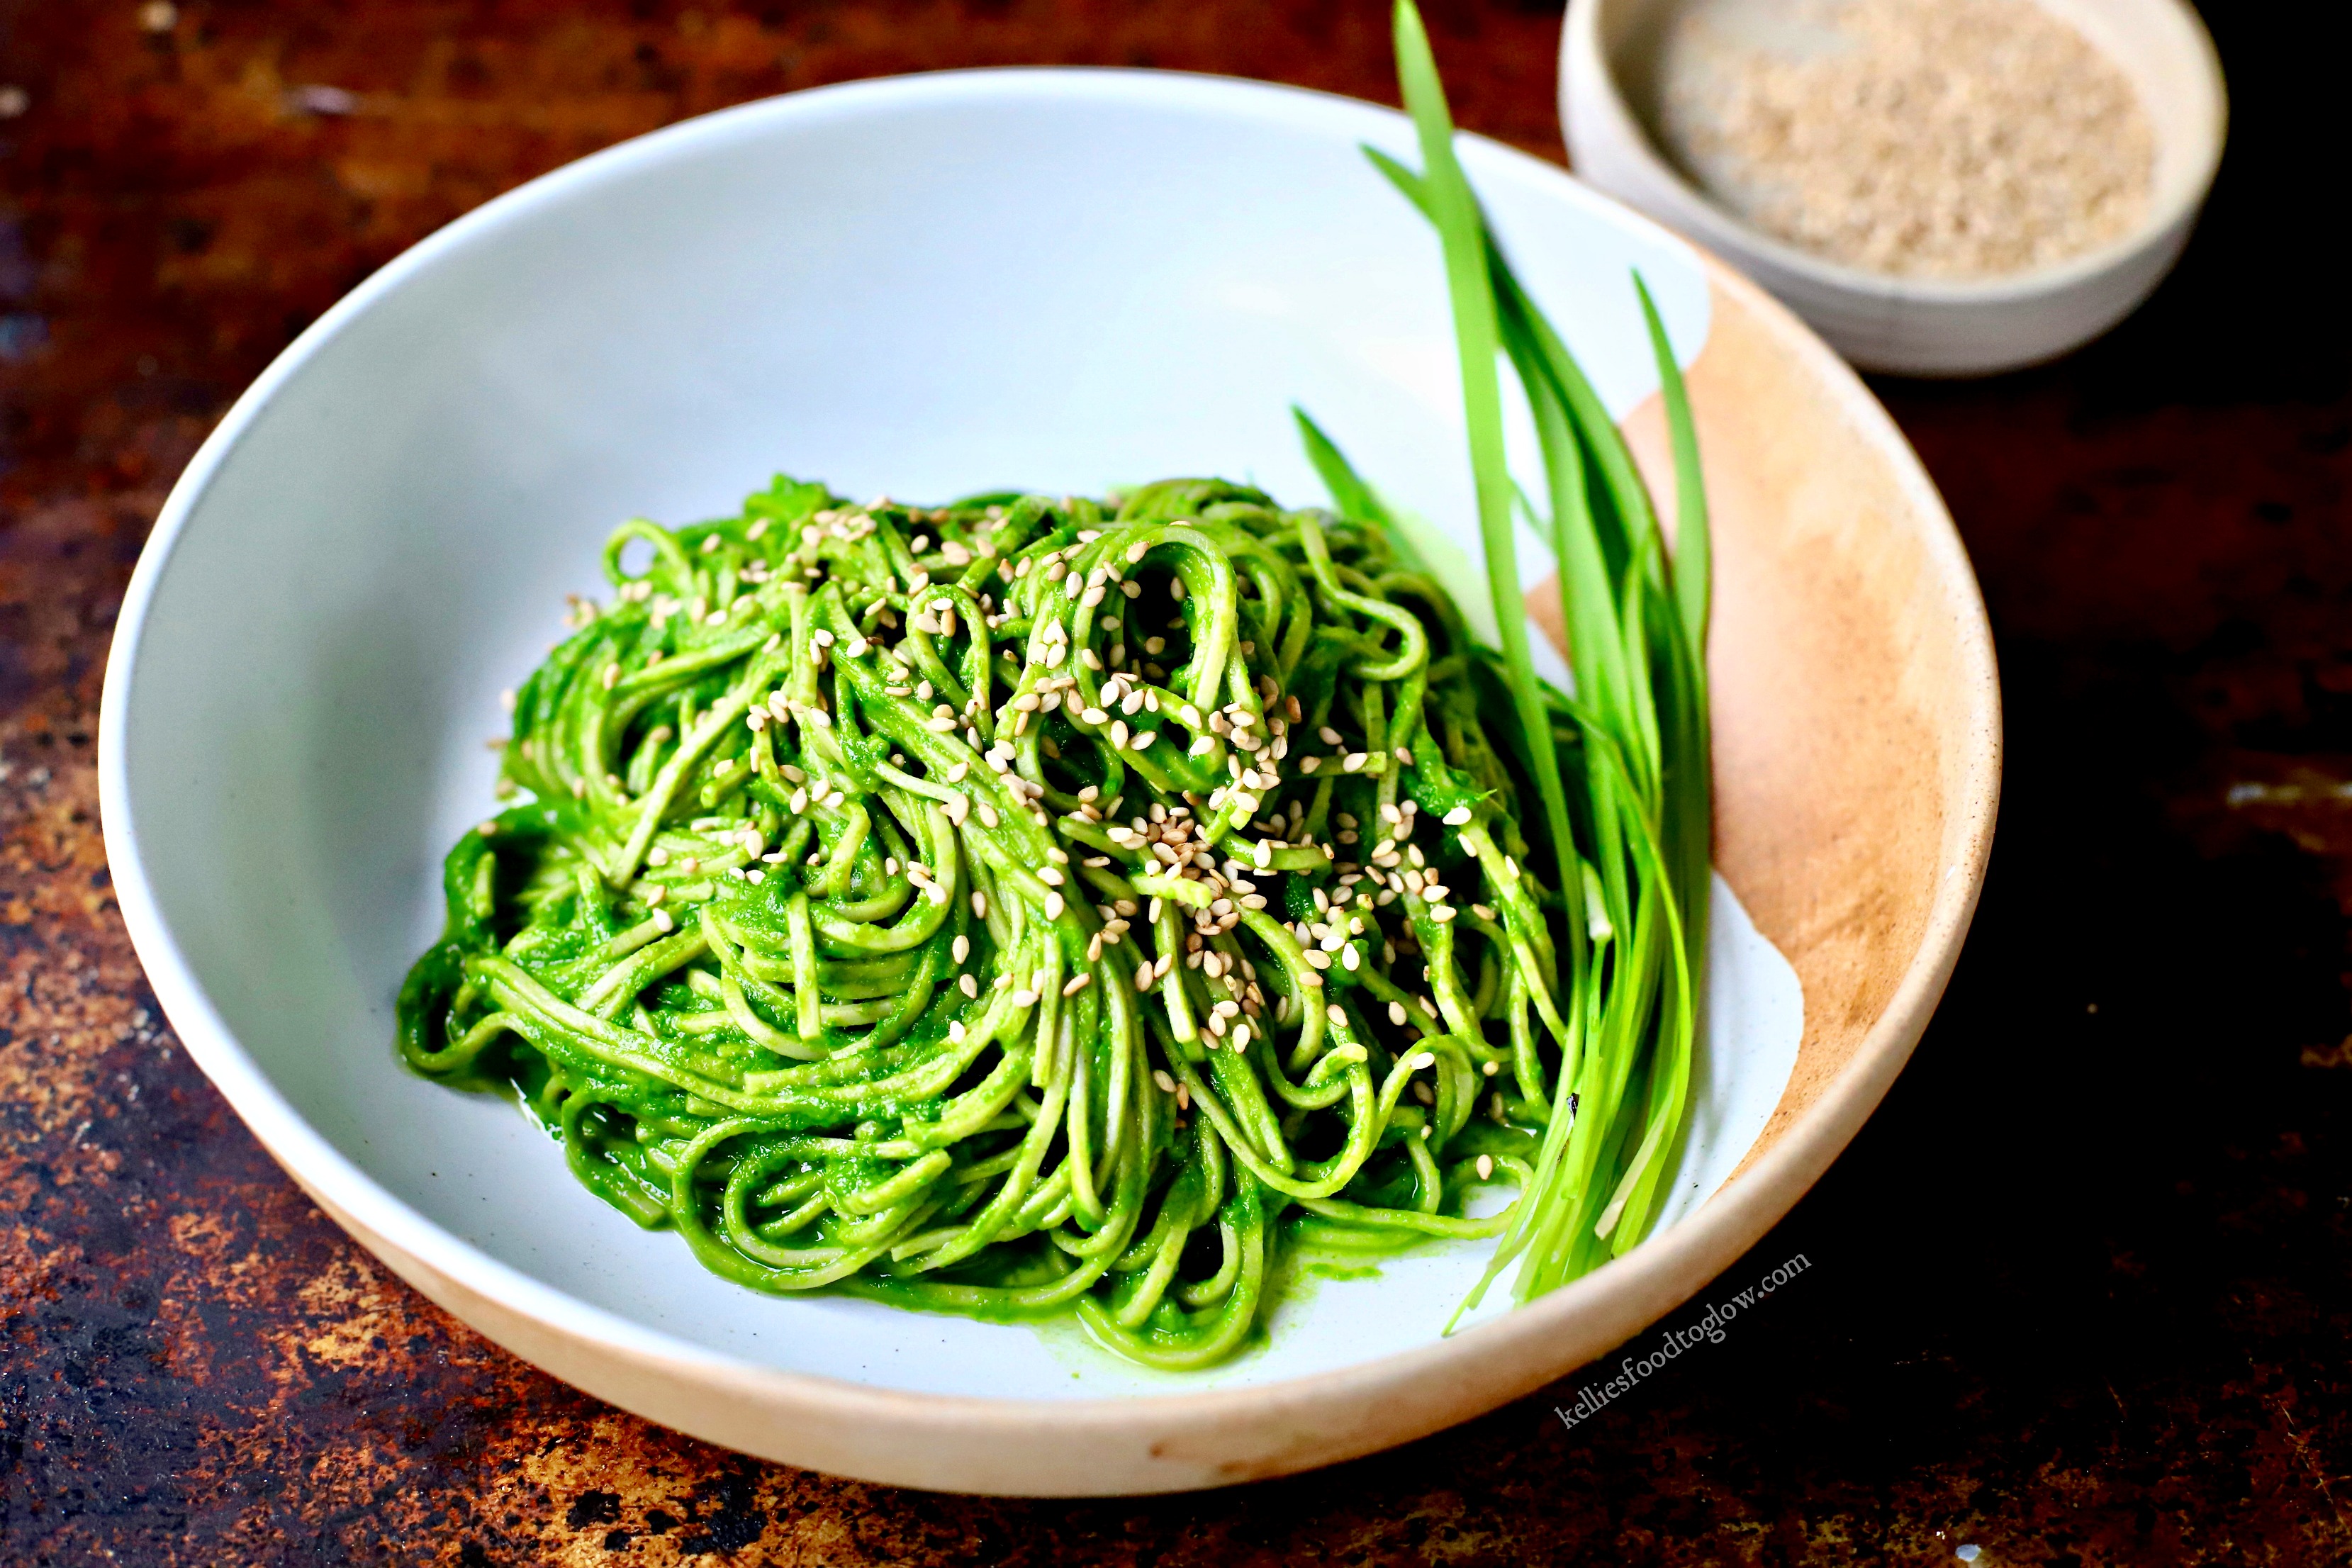 Silky and seasonal wild garlic, #miso and spinach #sauce for pasta, noodles, steamed vegetables and more. #wildgarlic #rawfood #vegan #glutenfree